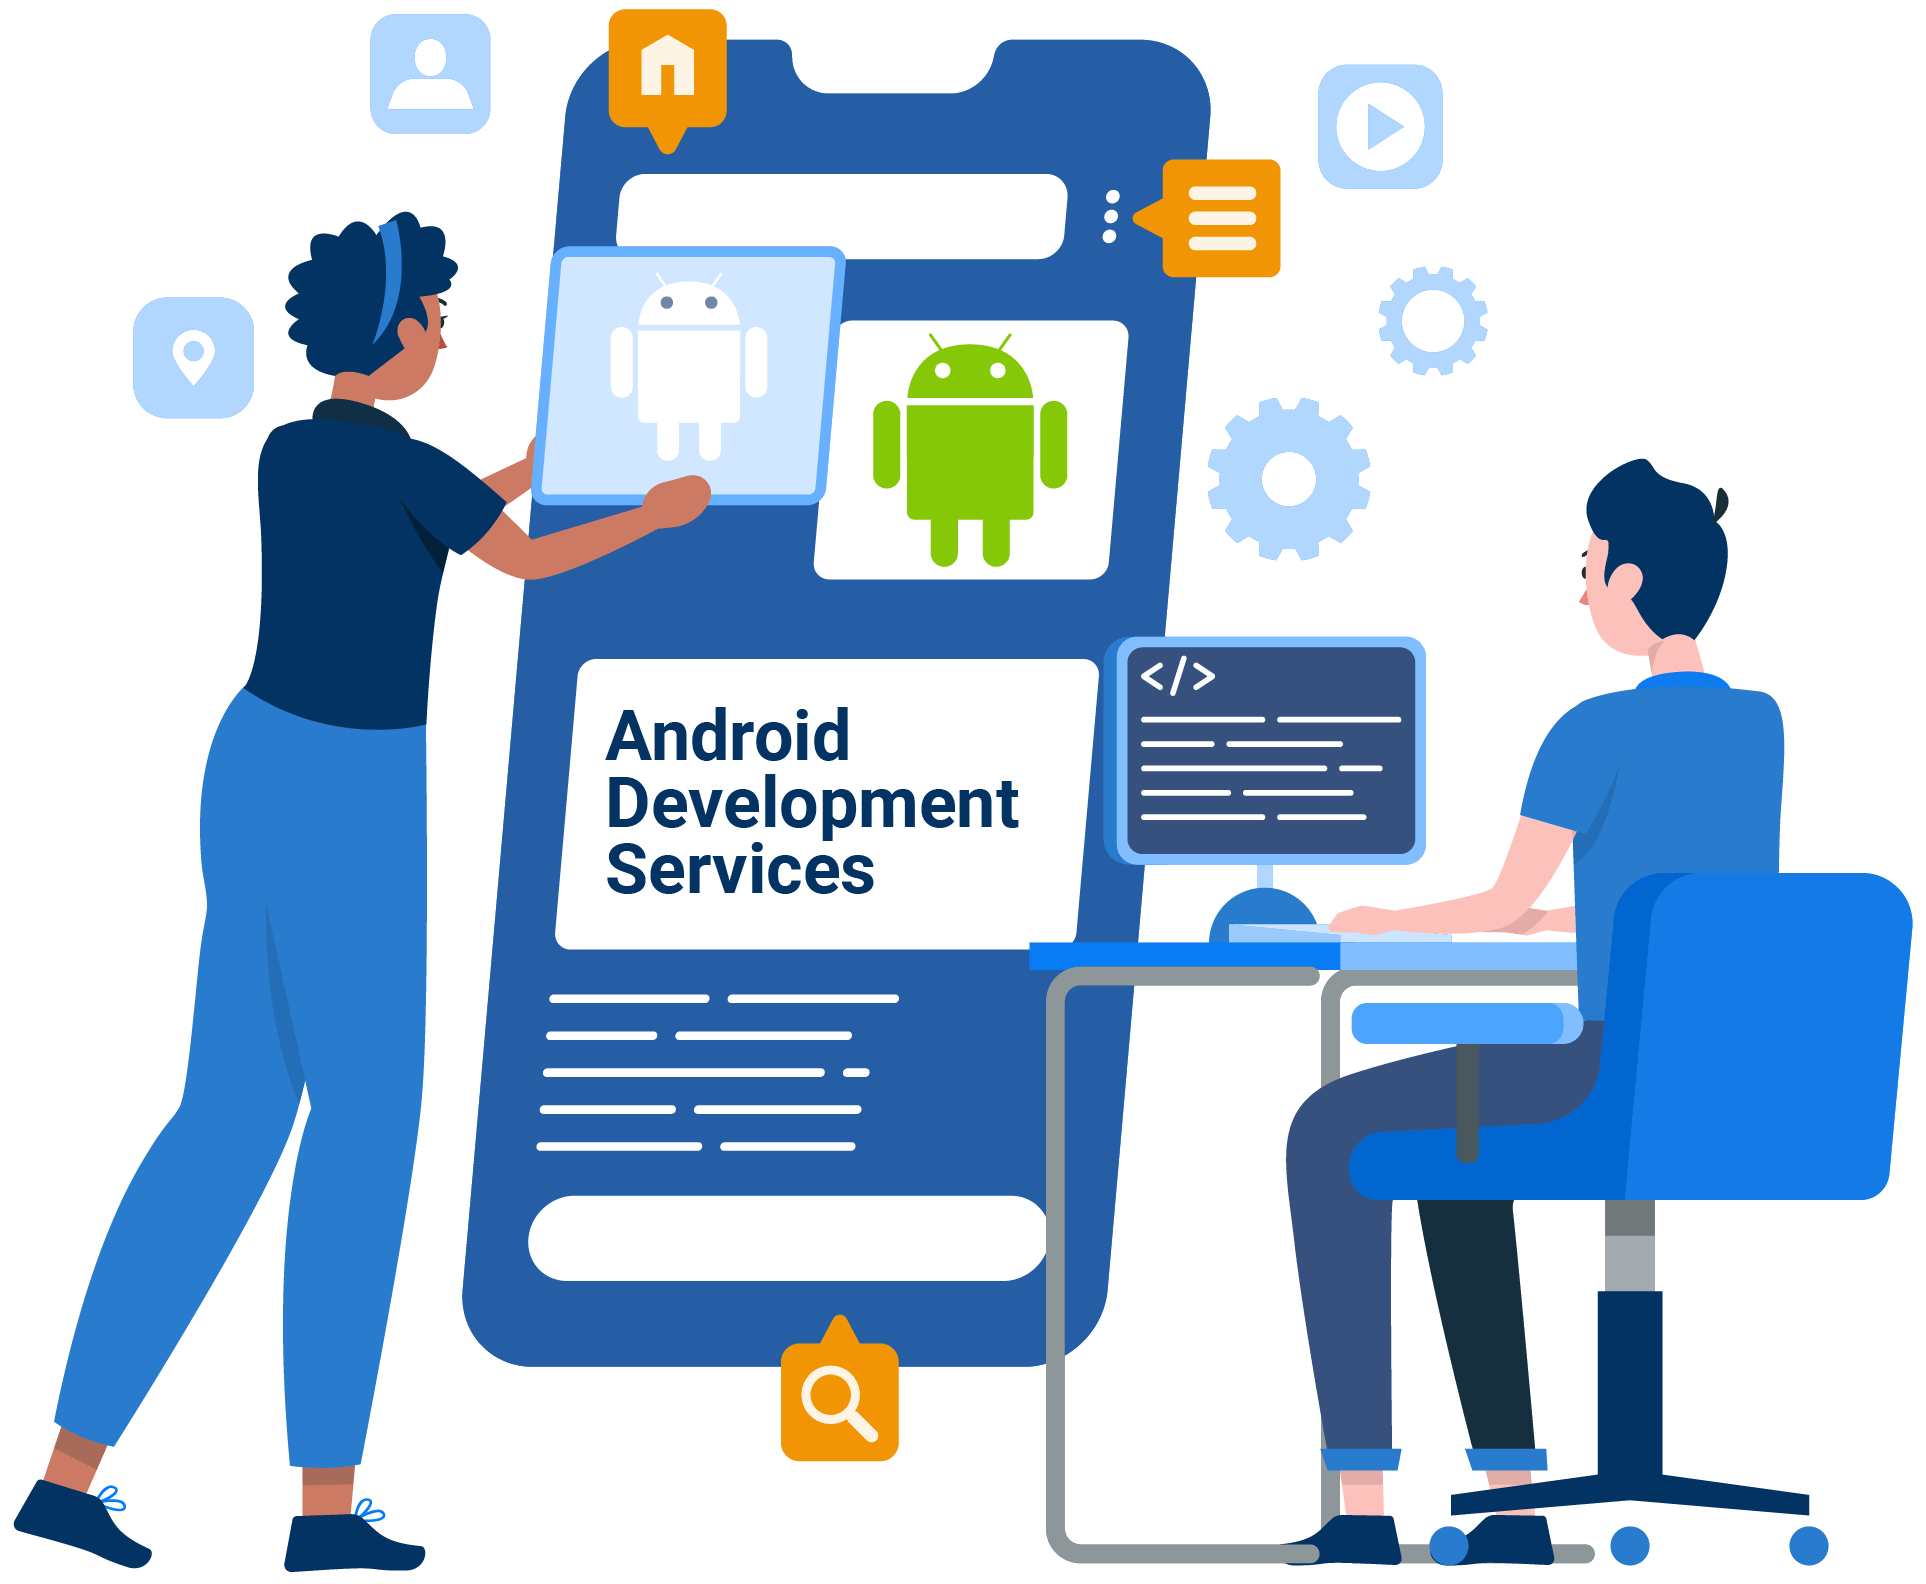 Android Development services